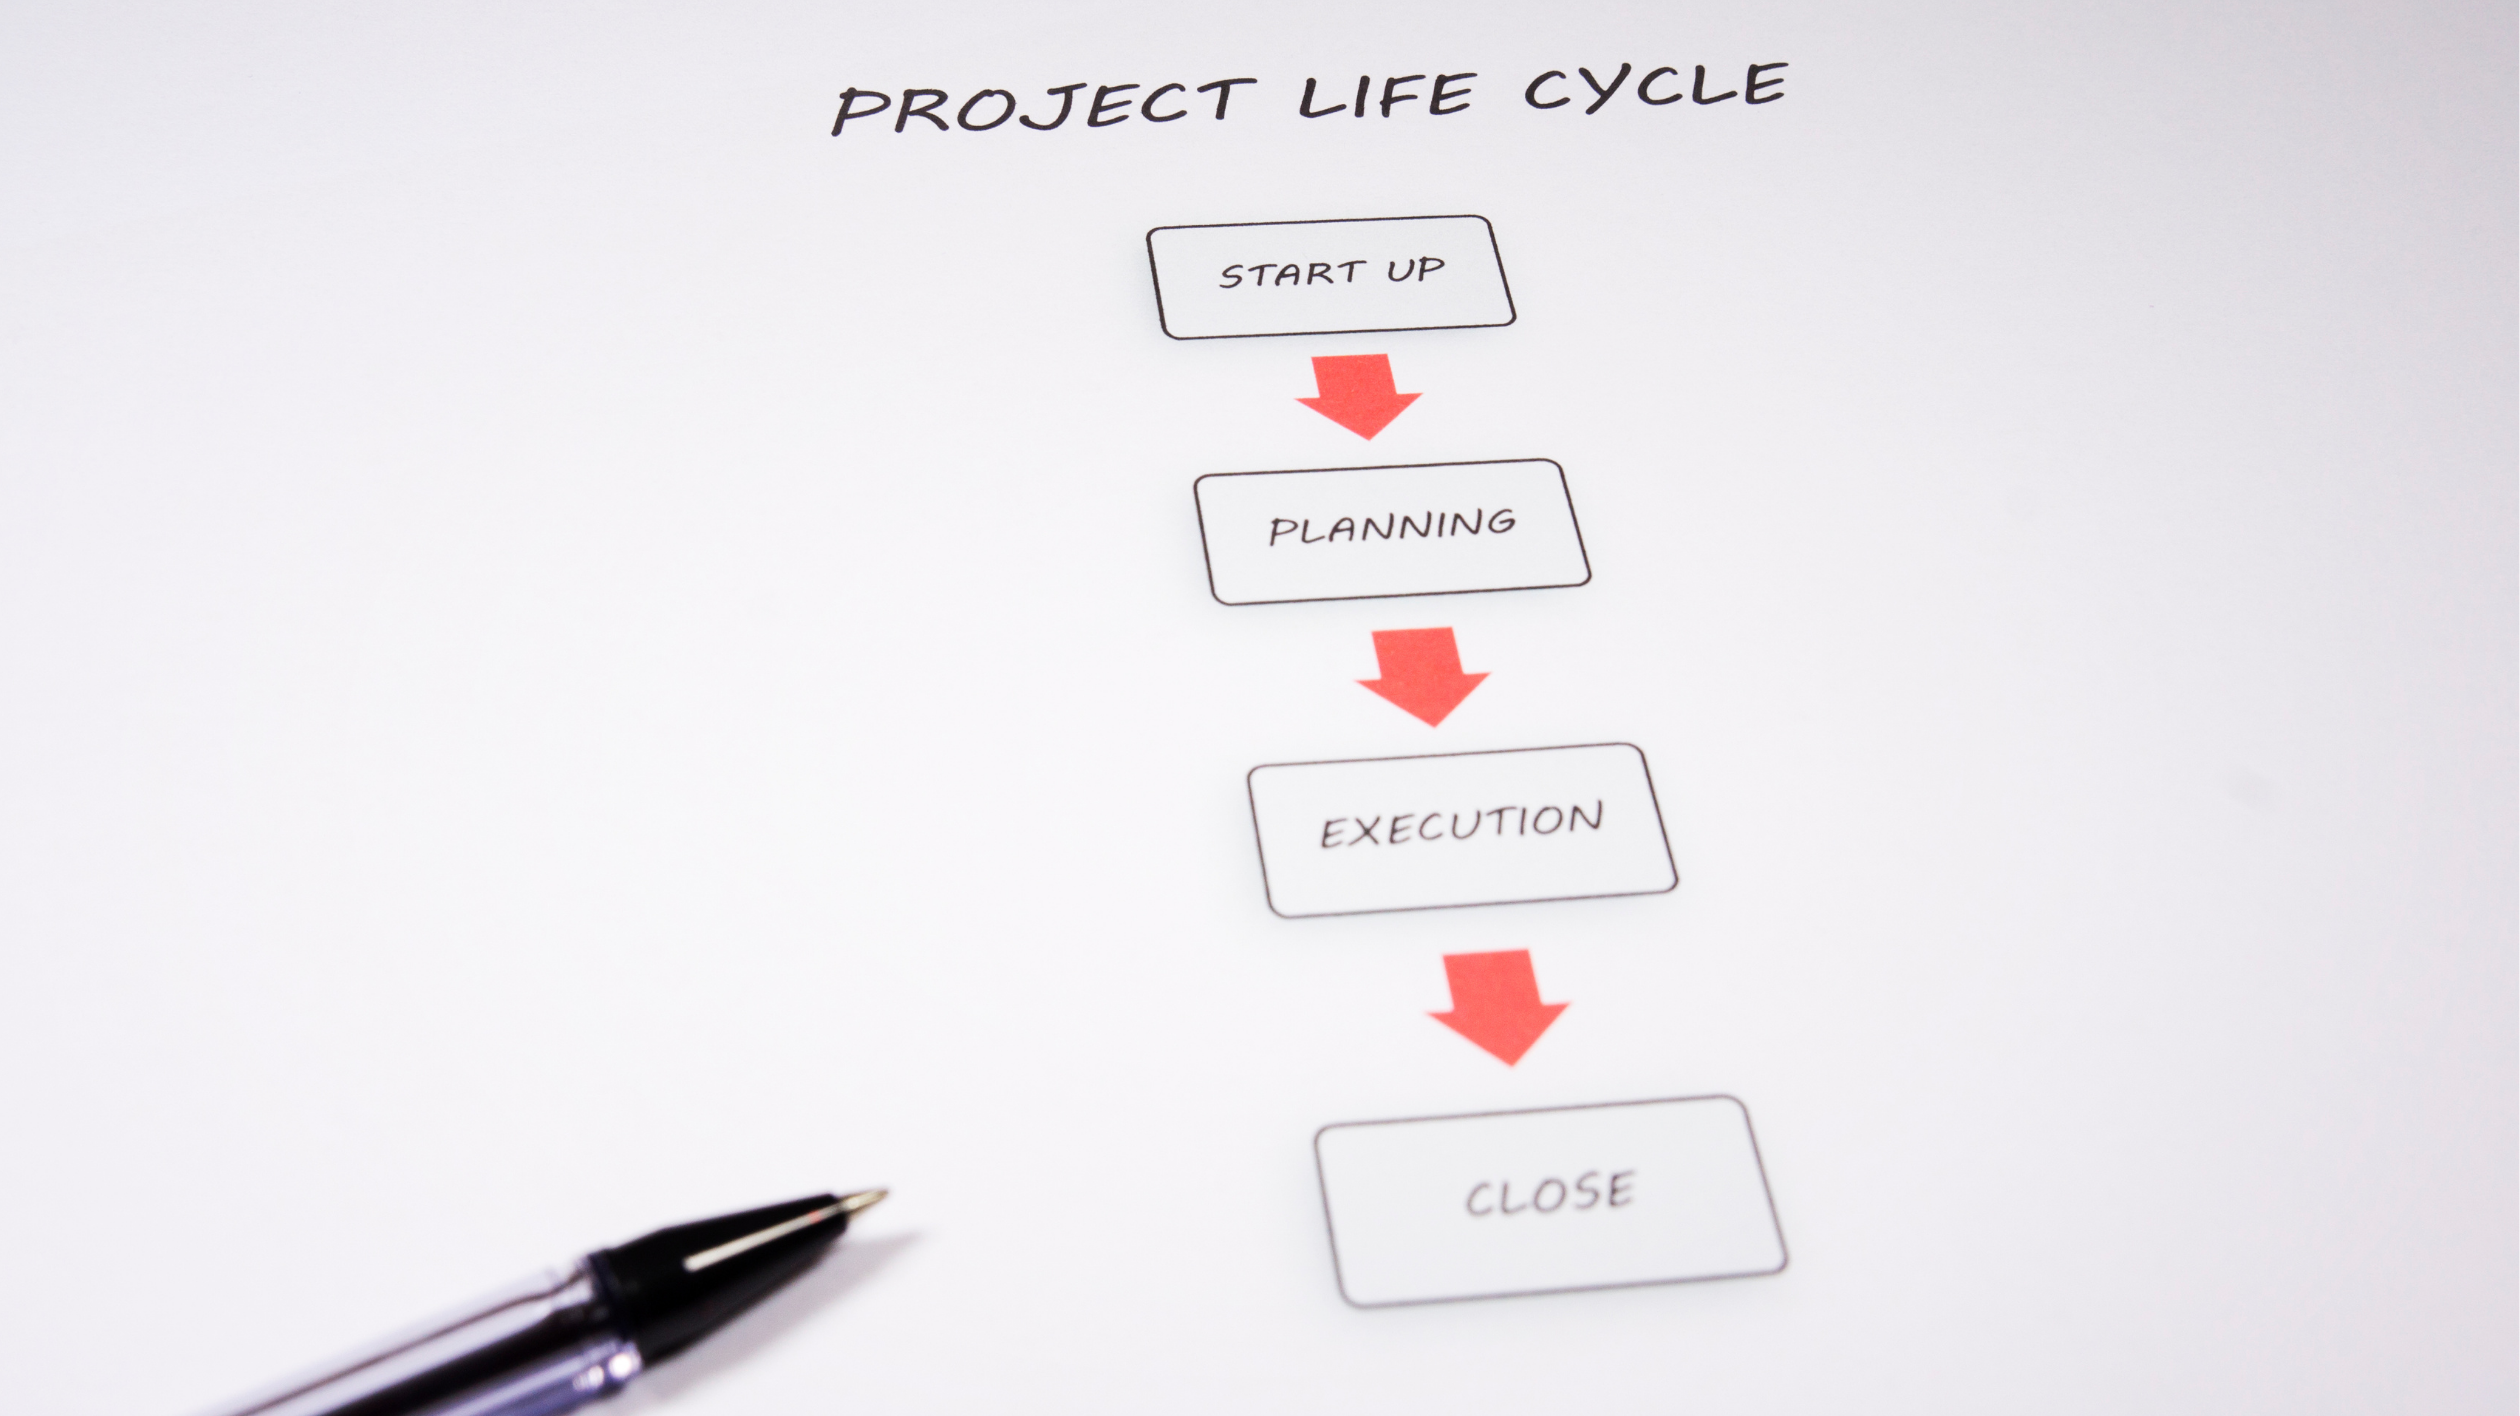 What are the phases of project cycle management?